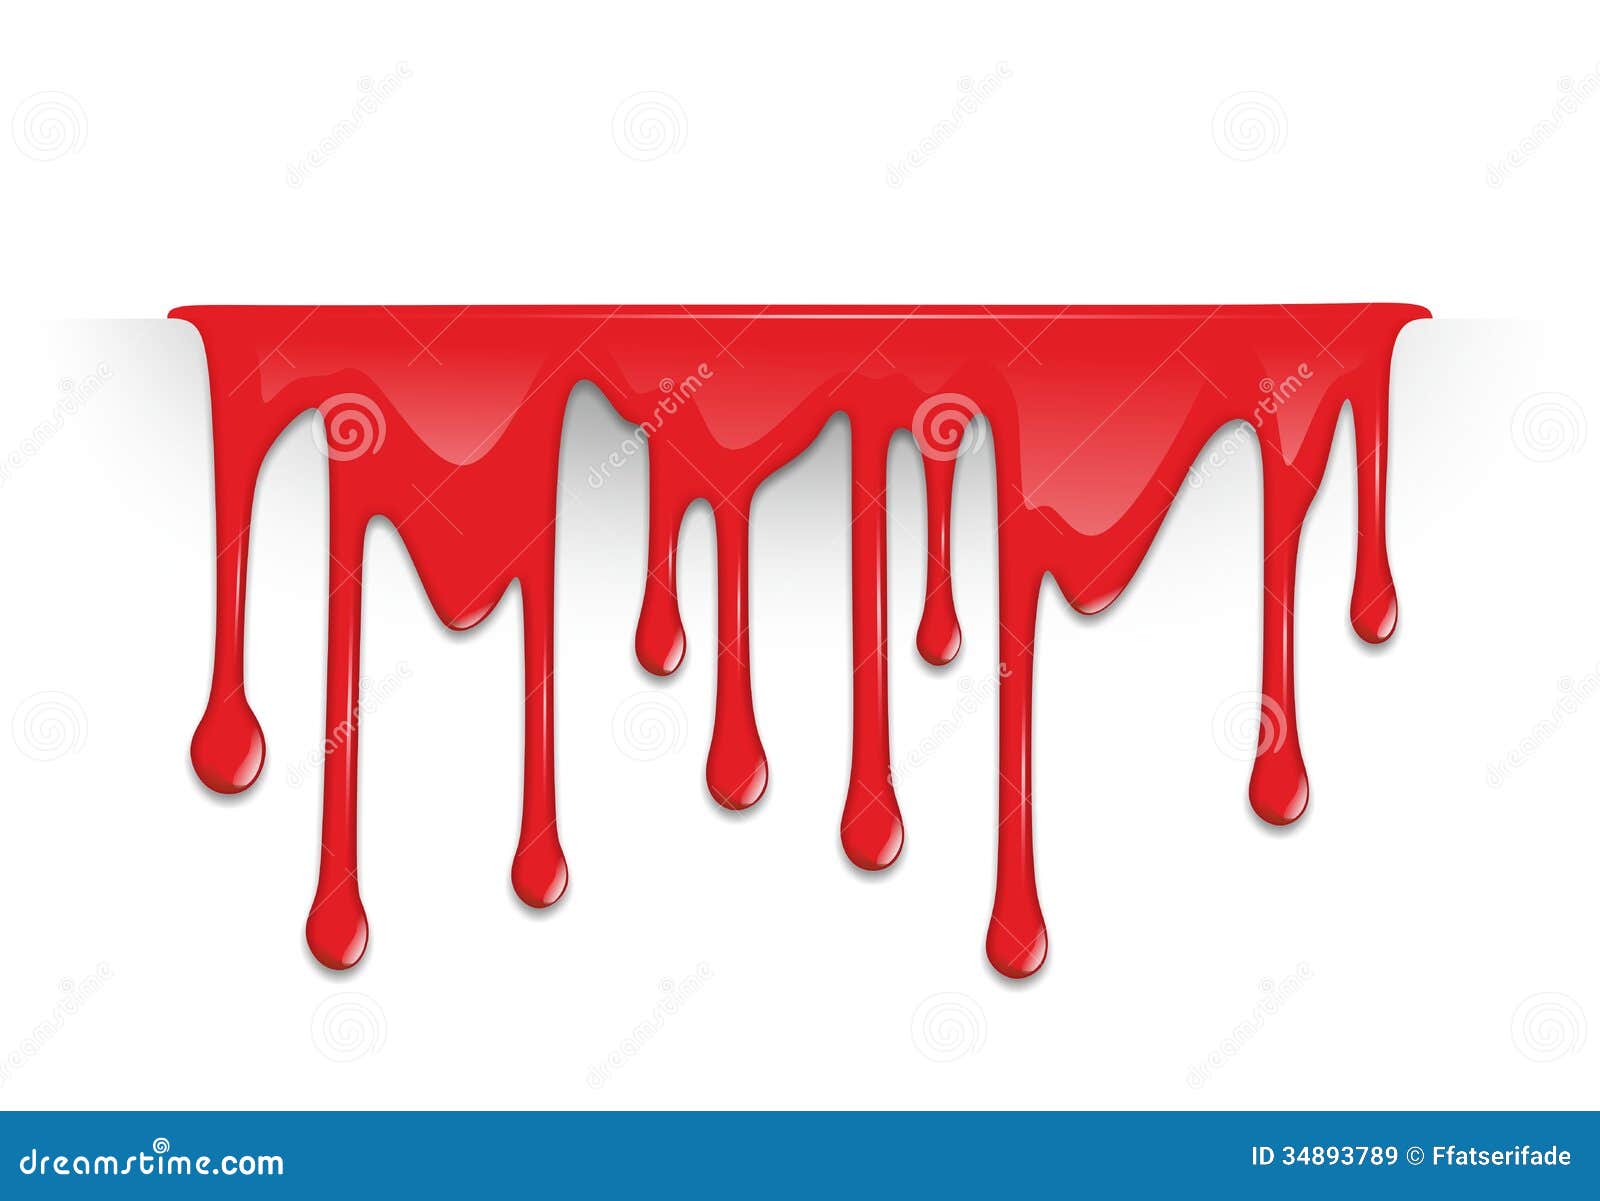 dripping blood clipart border - photo #33